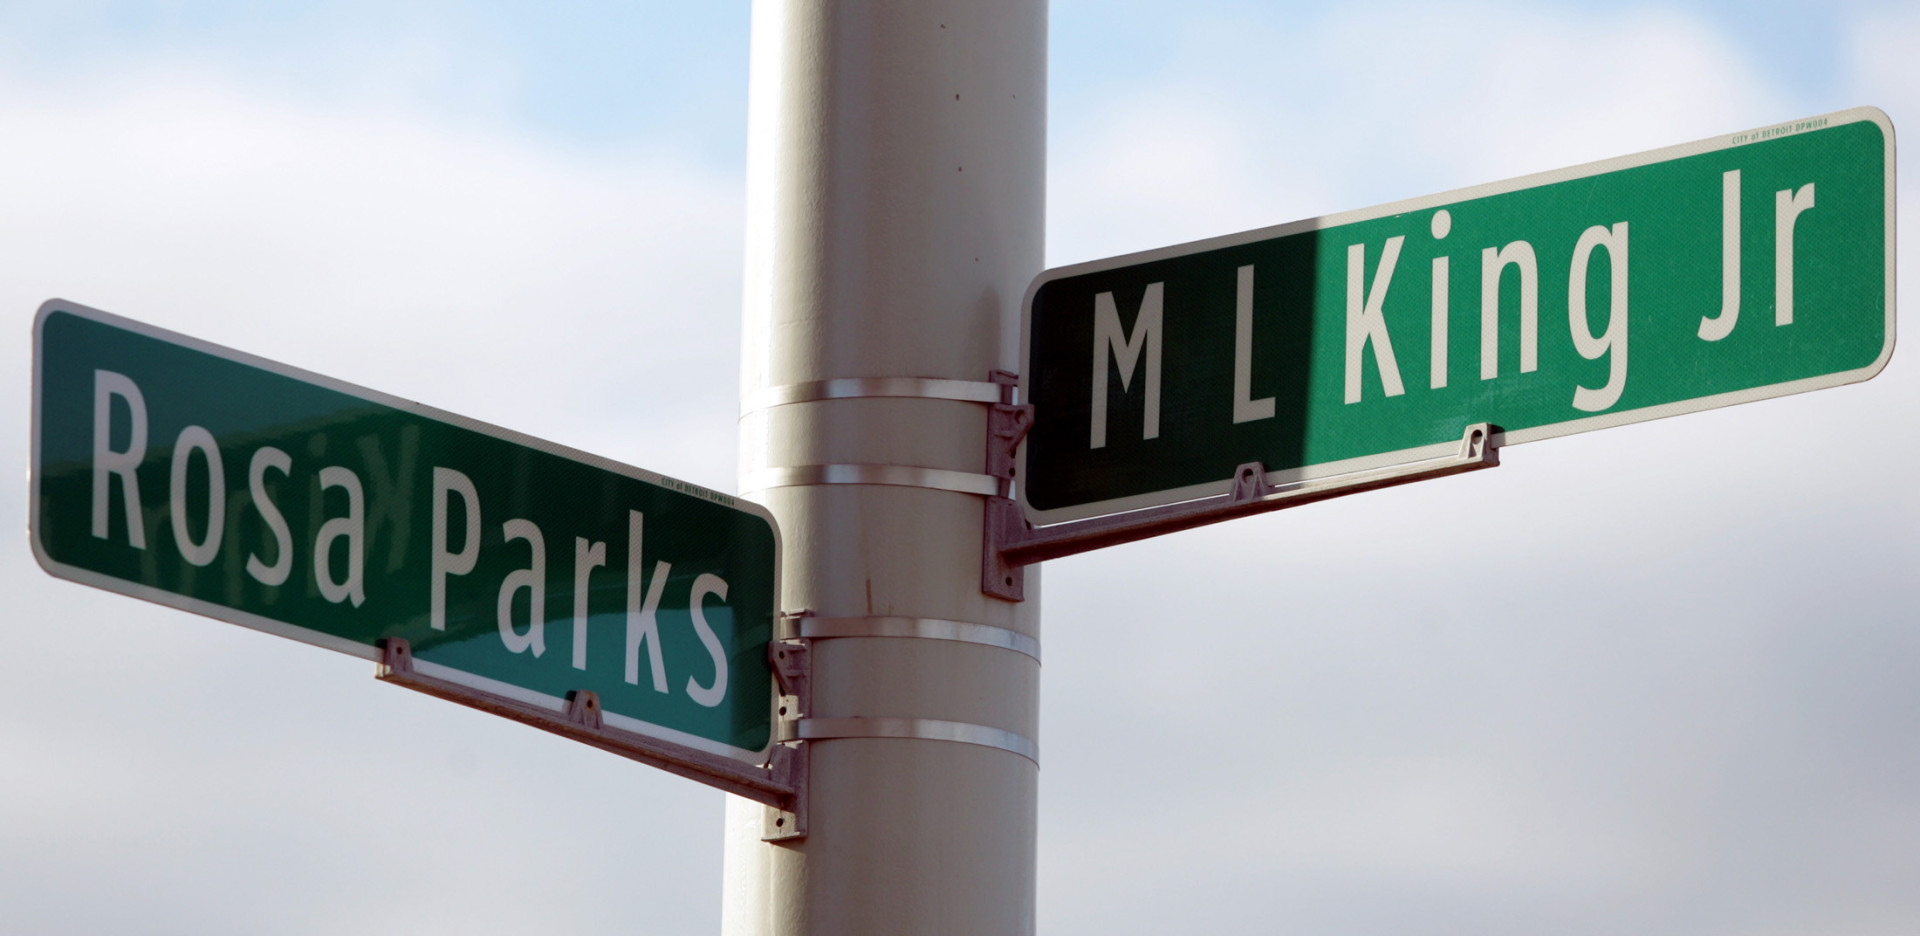 Many roads and streets across the country are named for King and Rosa Parks.<p><a href="https://www.msn.com/en-us/community/channel/vid-7xx8mnucu55yw63we9va2gwr7uihbxwc68fxqp25x6tg4ftibpra?cvid=94631541bc0f4f89bfd59158d696ad7e">Follow us and access great exclusive content every day</a></p>